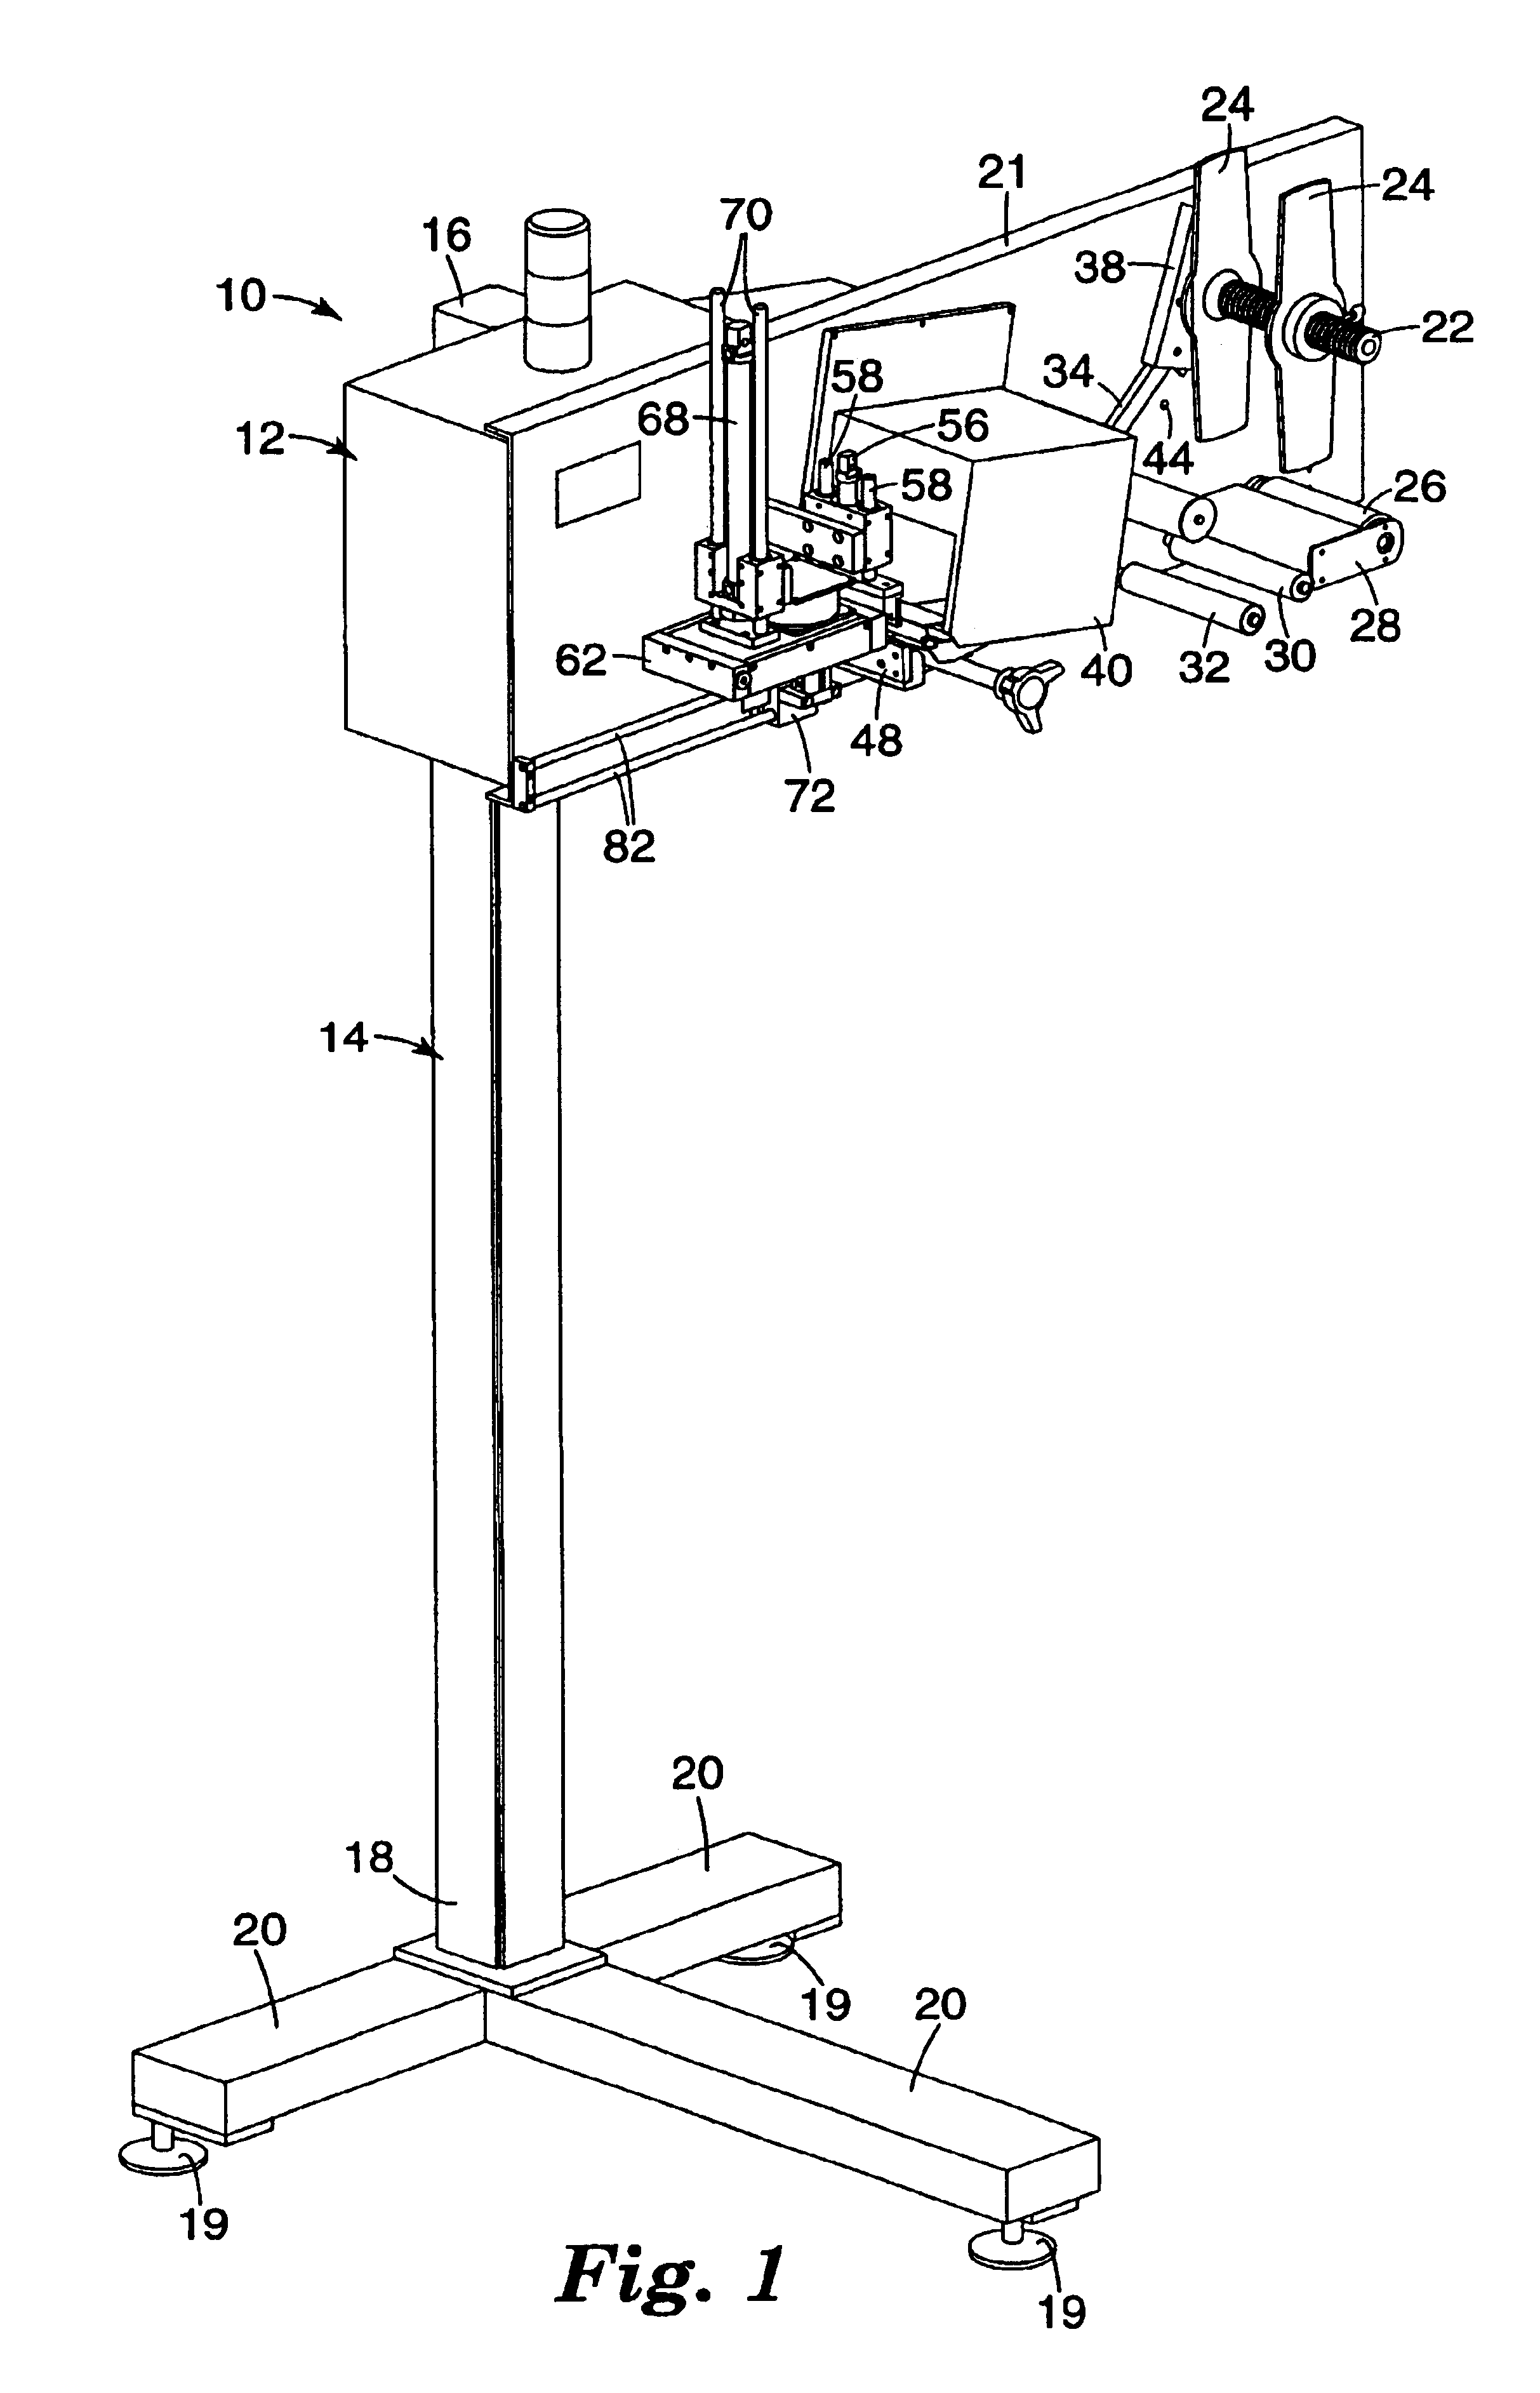 Apparatus for printing and applying tape and methods of printing and applying tape